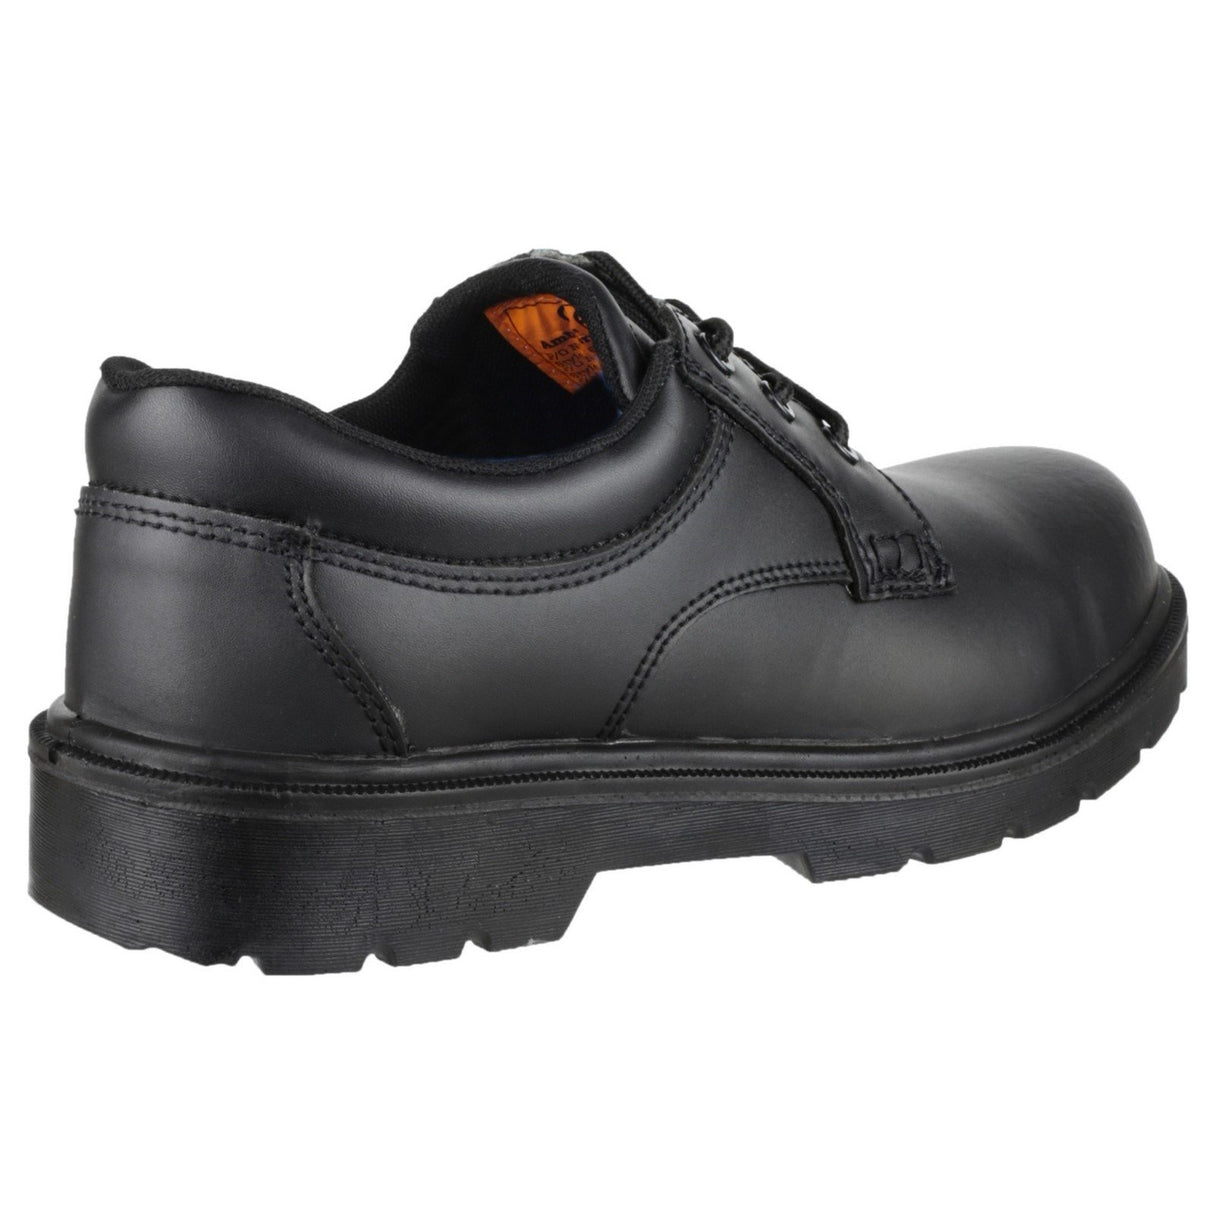 Amblers Safety Composite Safety Shoes